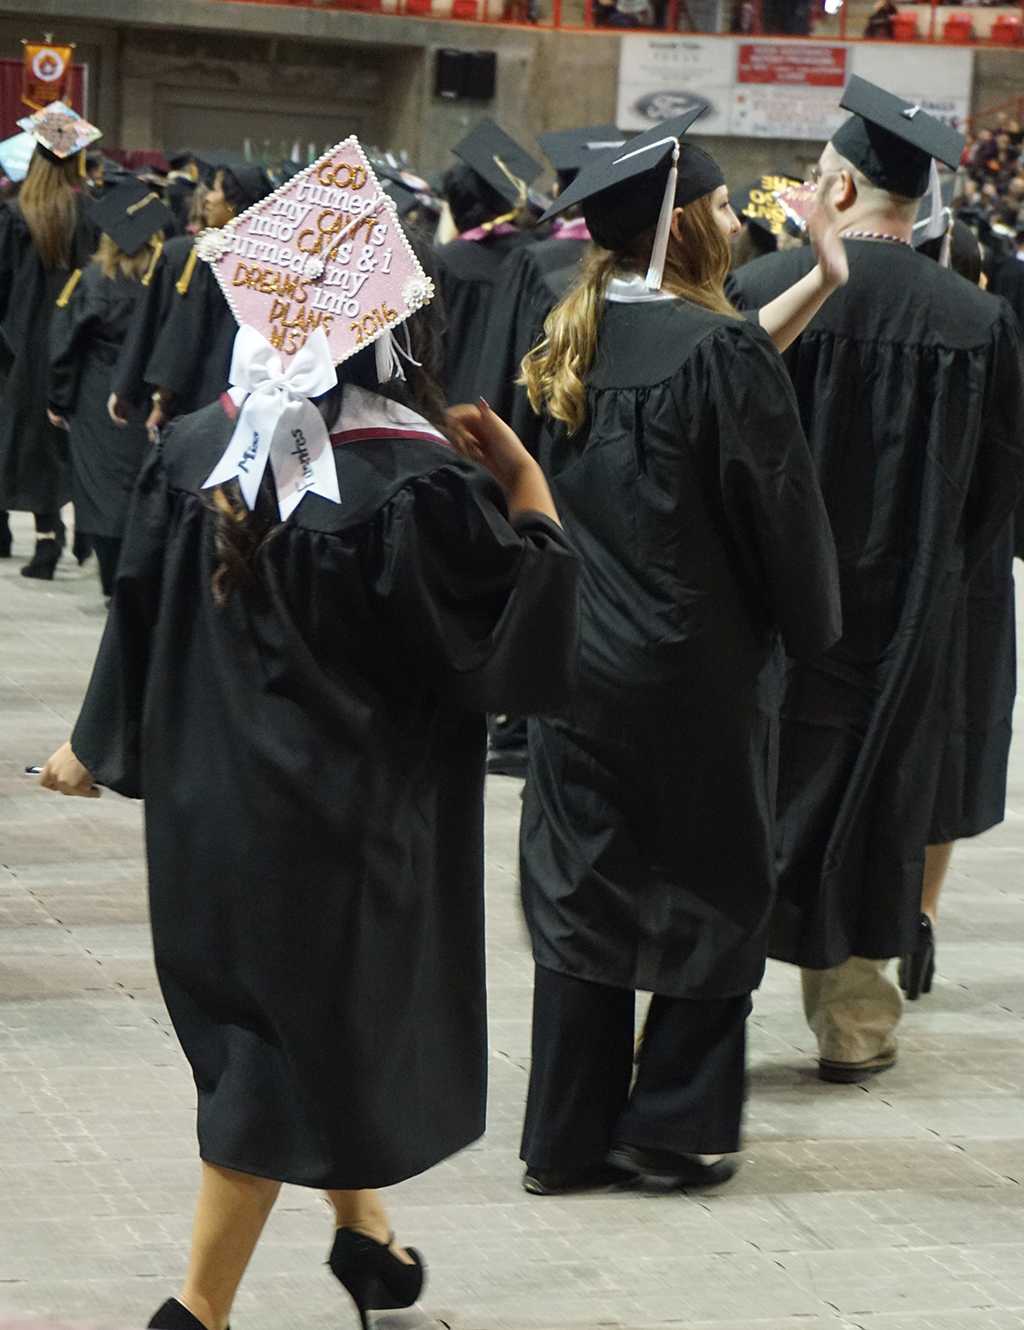 Graduates file into the coliseum to take their seats at the Midwestern State University graduation Dec. 17, 2016. Photo by Brendan Wynne